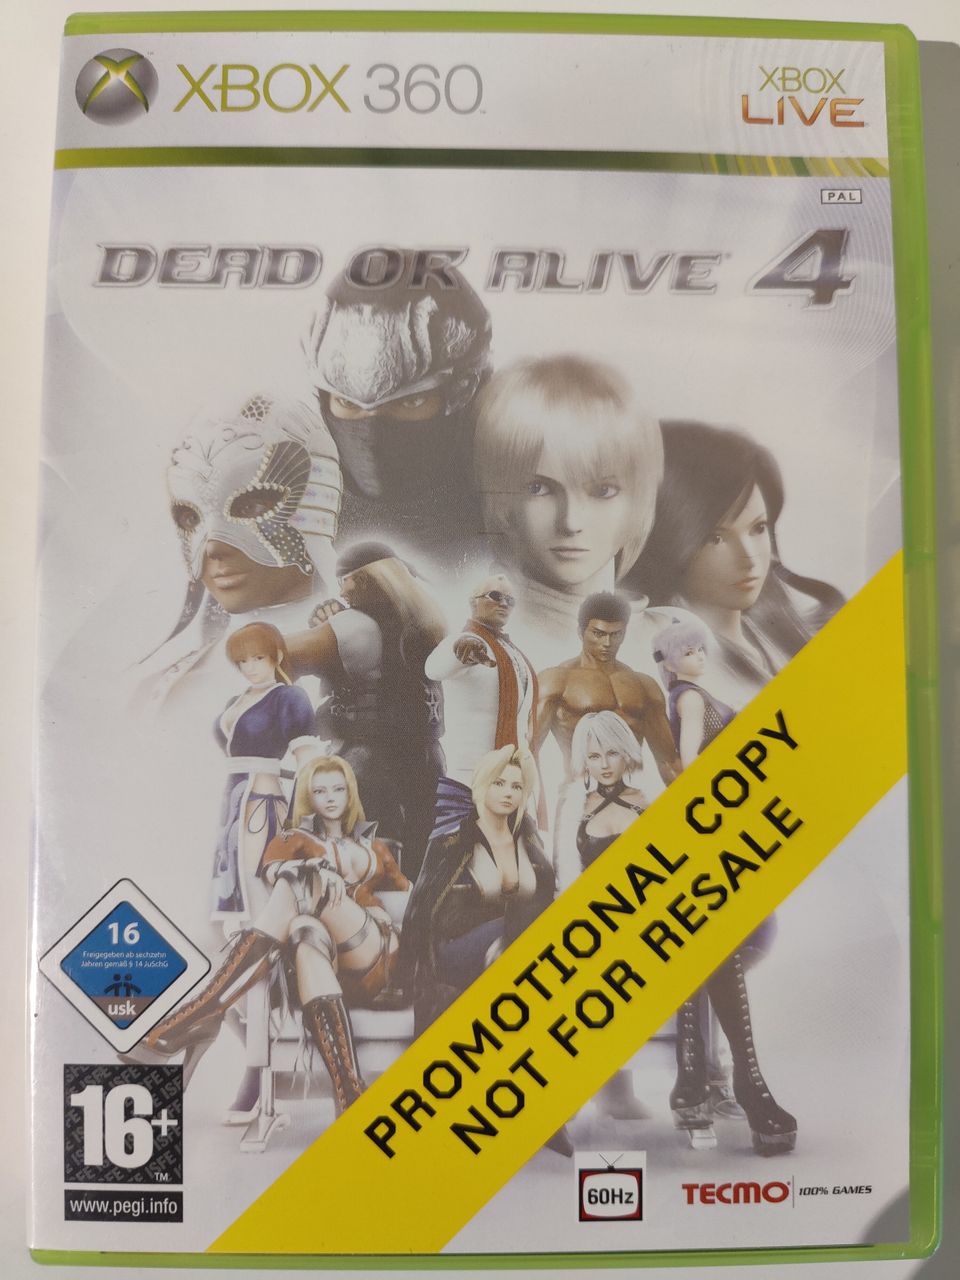 Xbox 360 Dead or Alive 4 (Promotion)